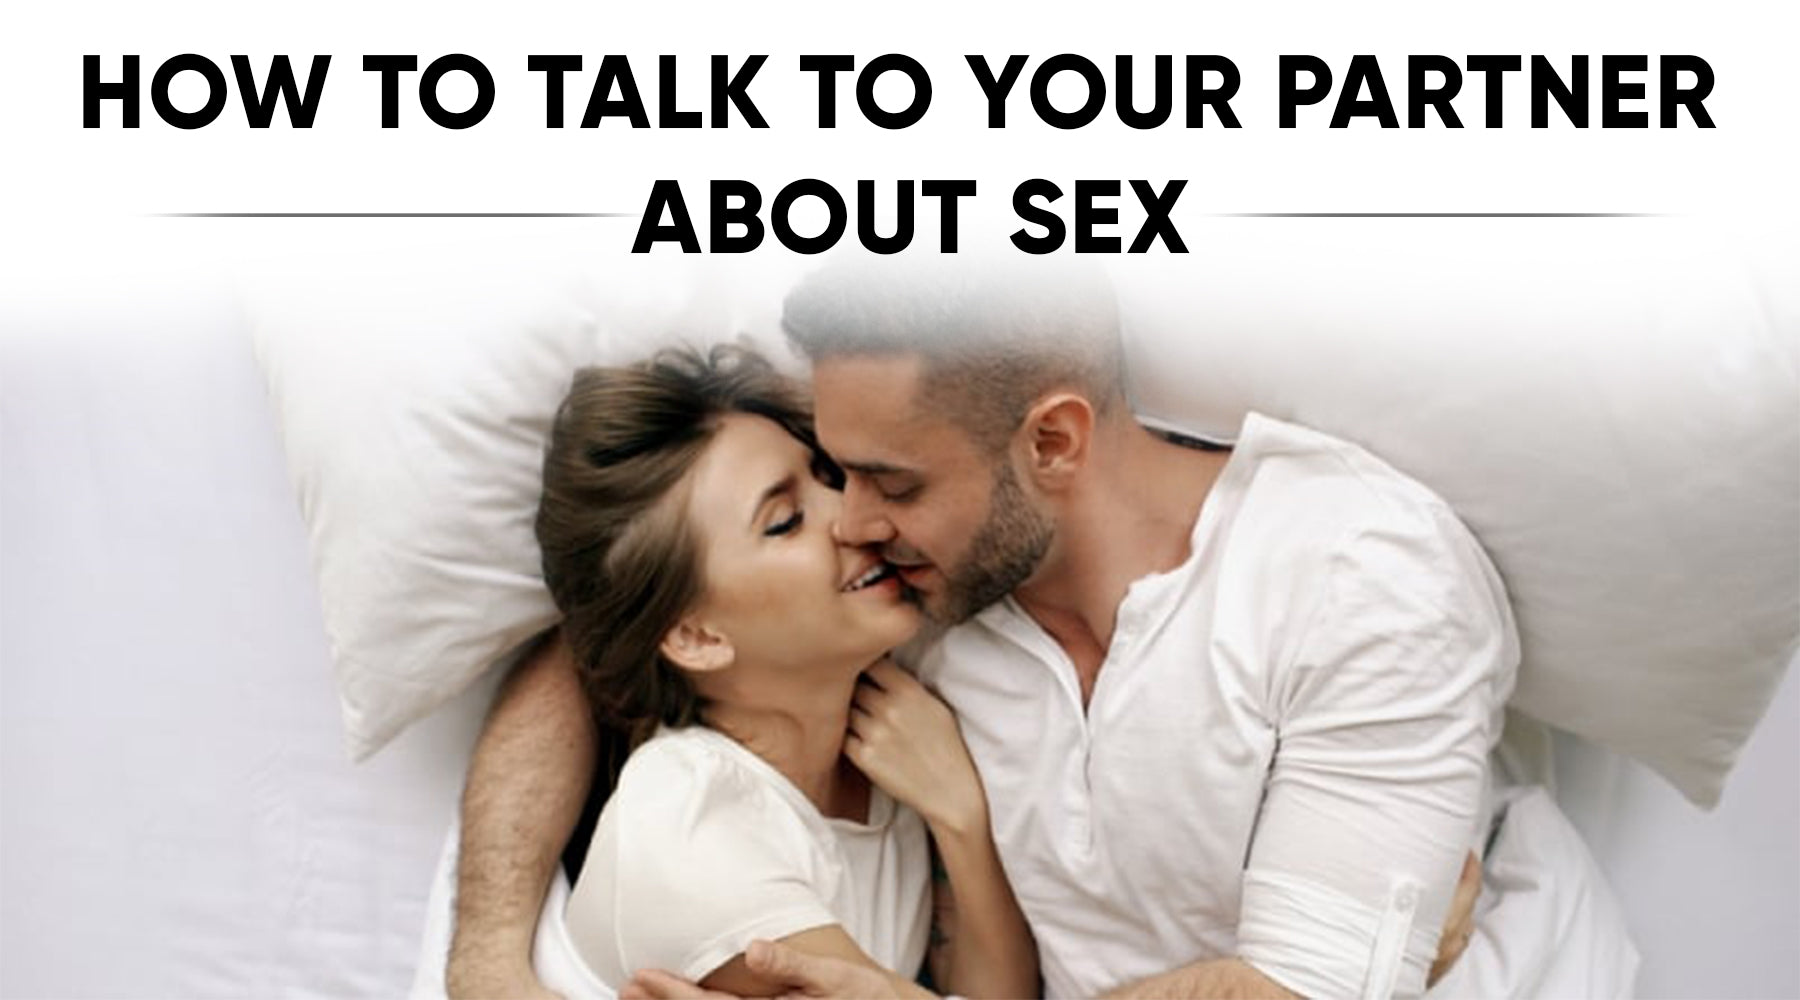 HOW TO TALK TO YOUR PARTNER ABOUT